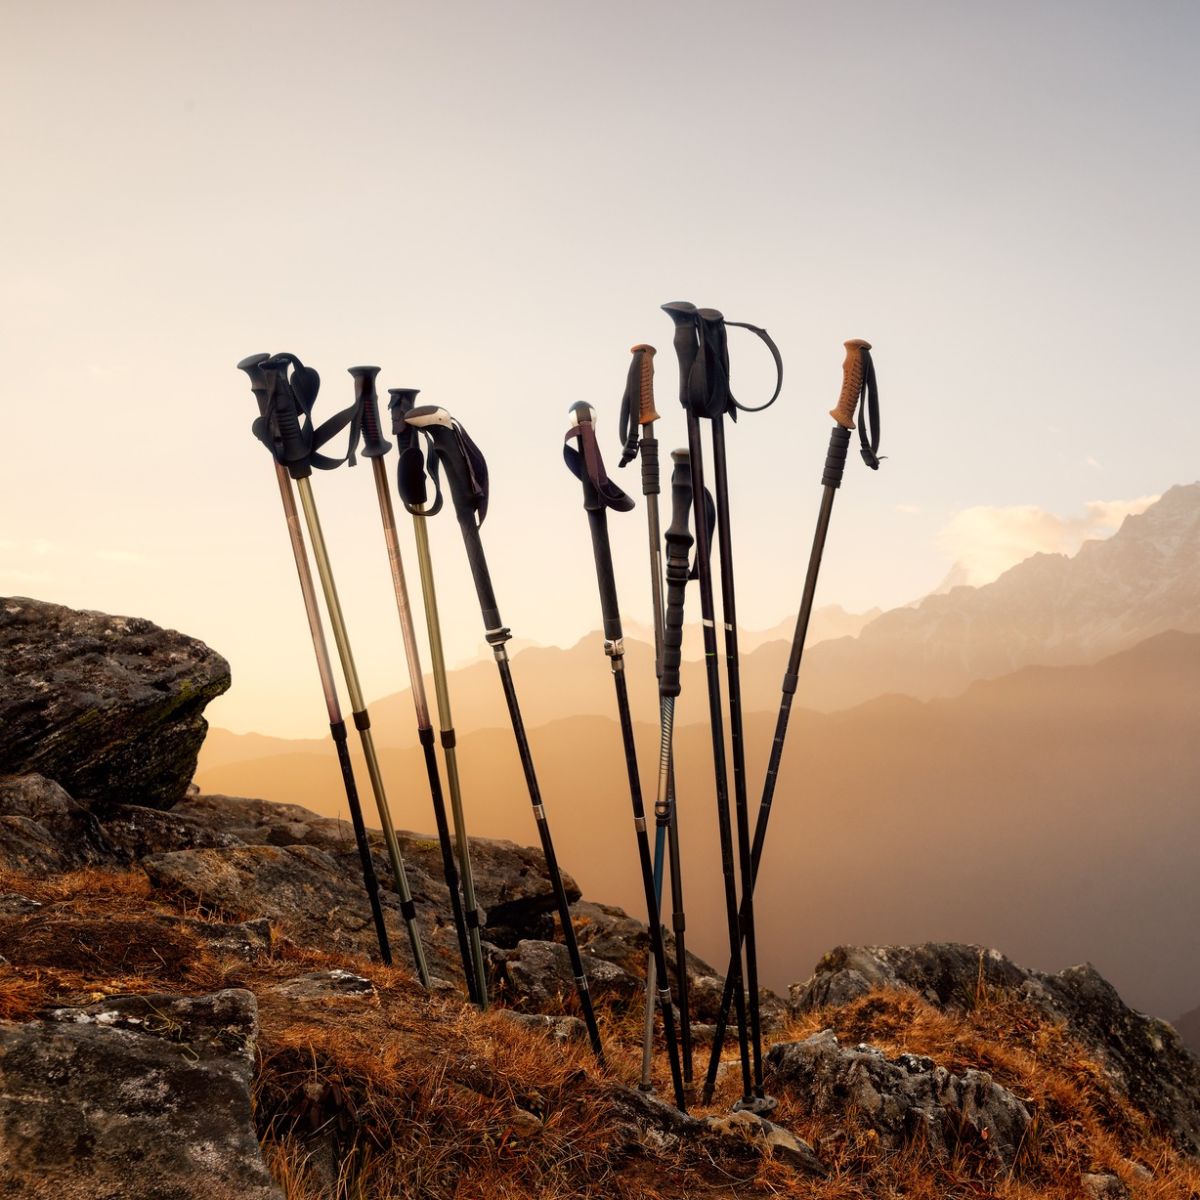 How to choose and use trekking poles